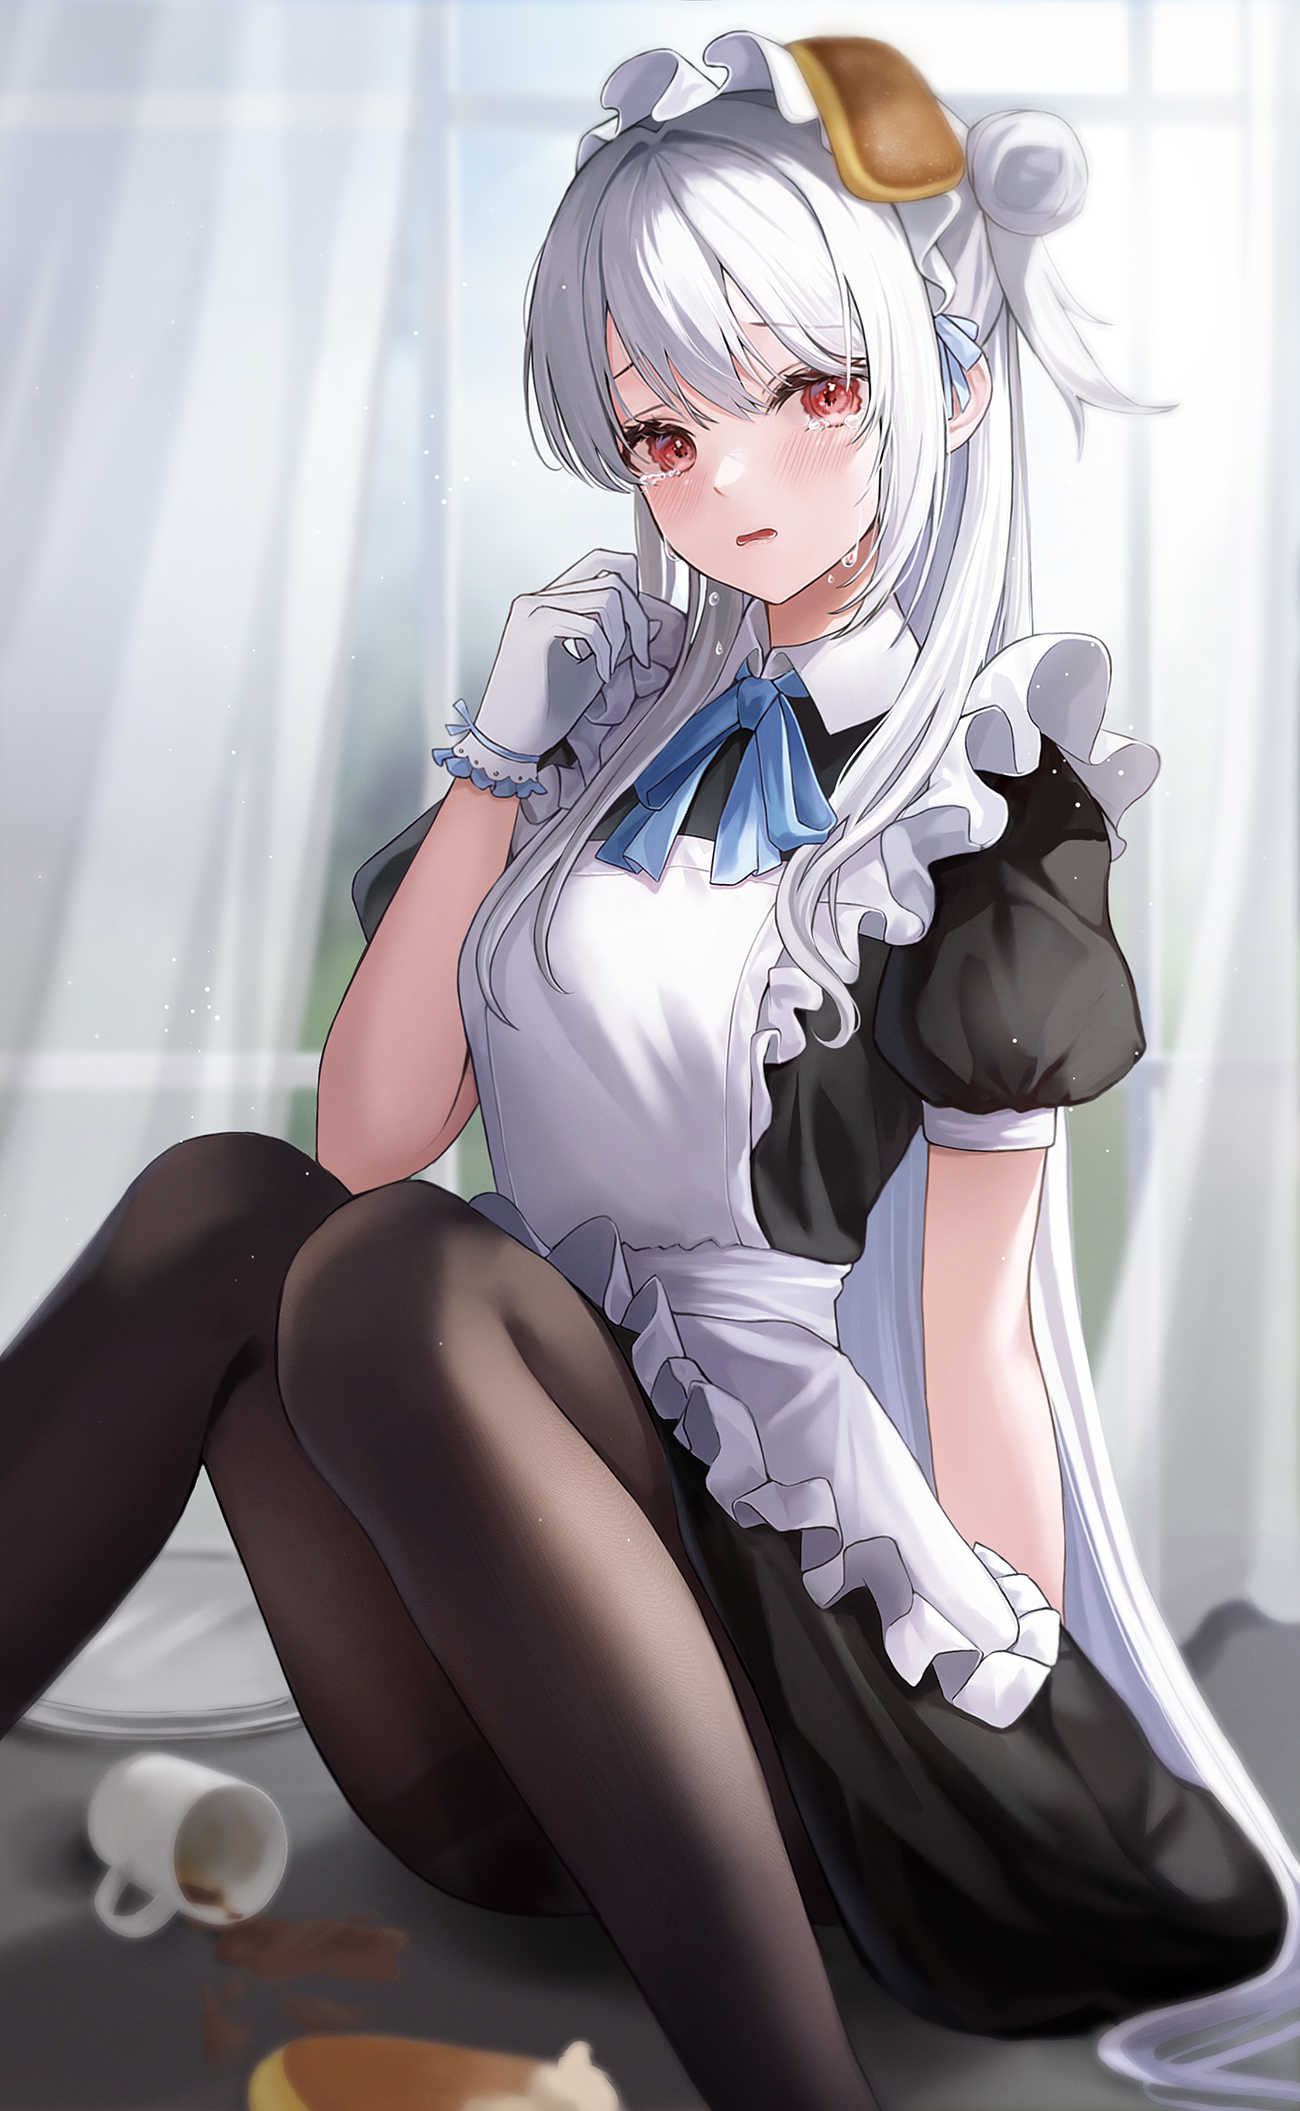 Anime 1300x2111 anime anime girls maid maid outfit gloves portrait display